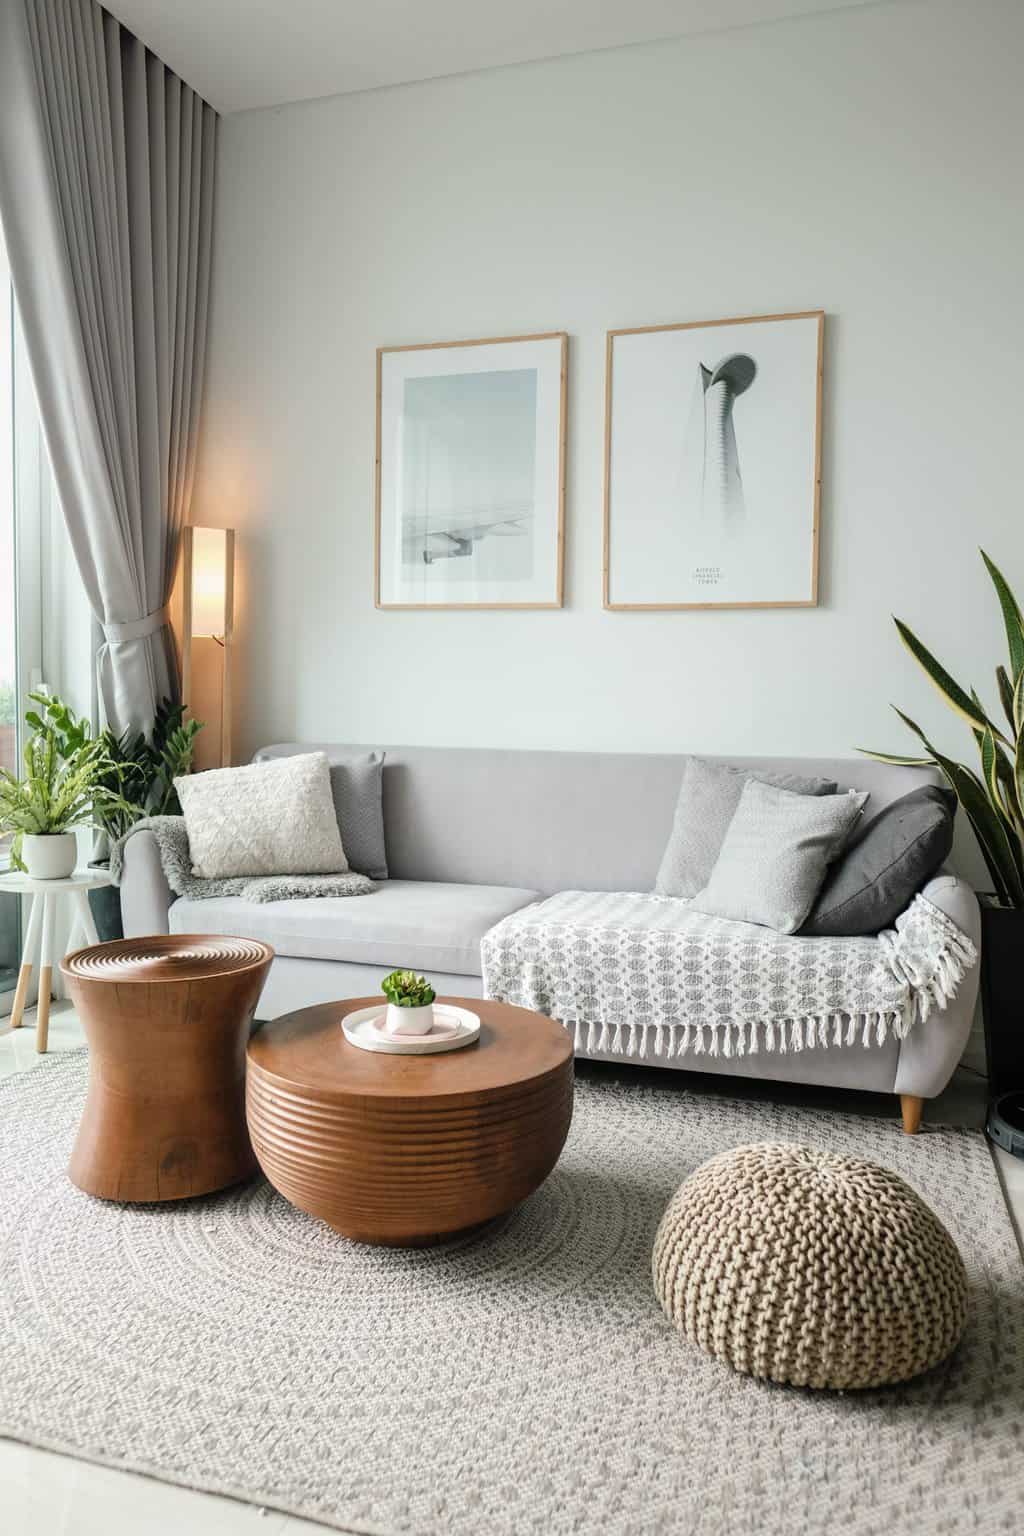 Having a beautiful home doesn't have to be expensive. These 5 Thrifty Ways to Decorate Your Home give you a big bang for little money.